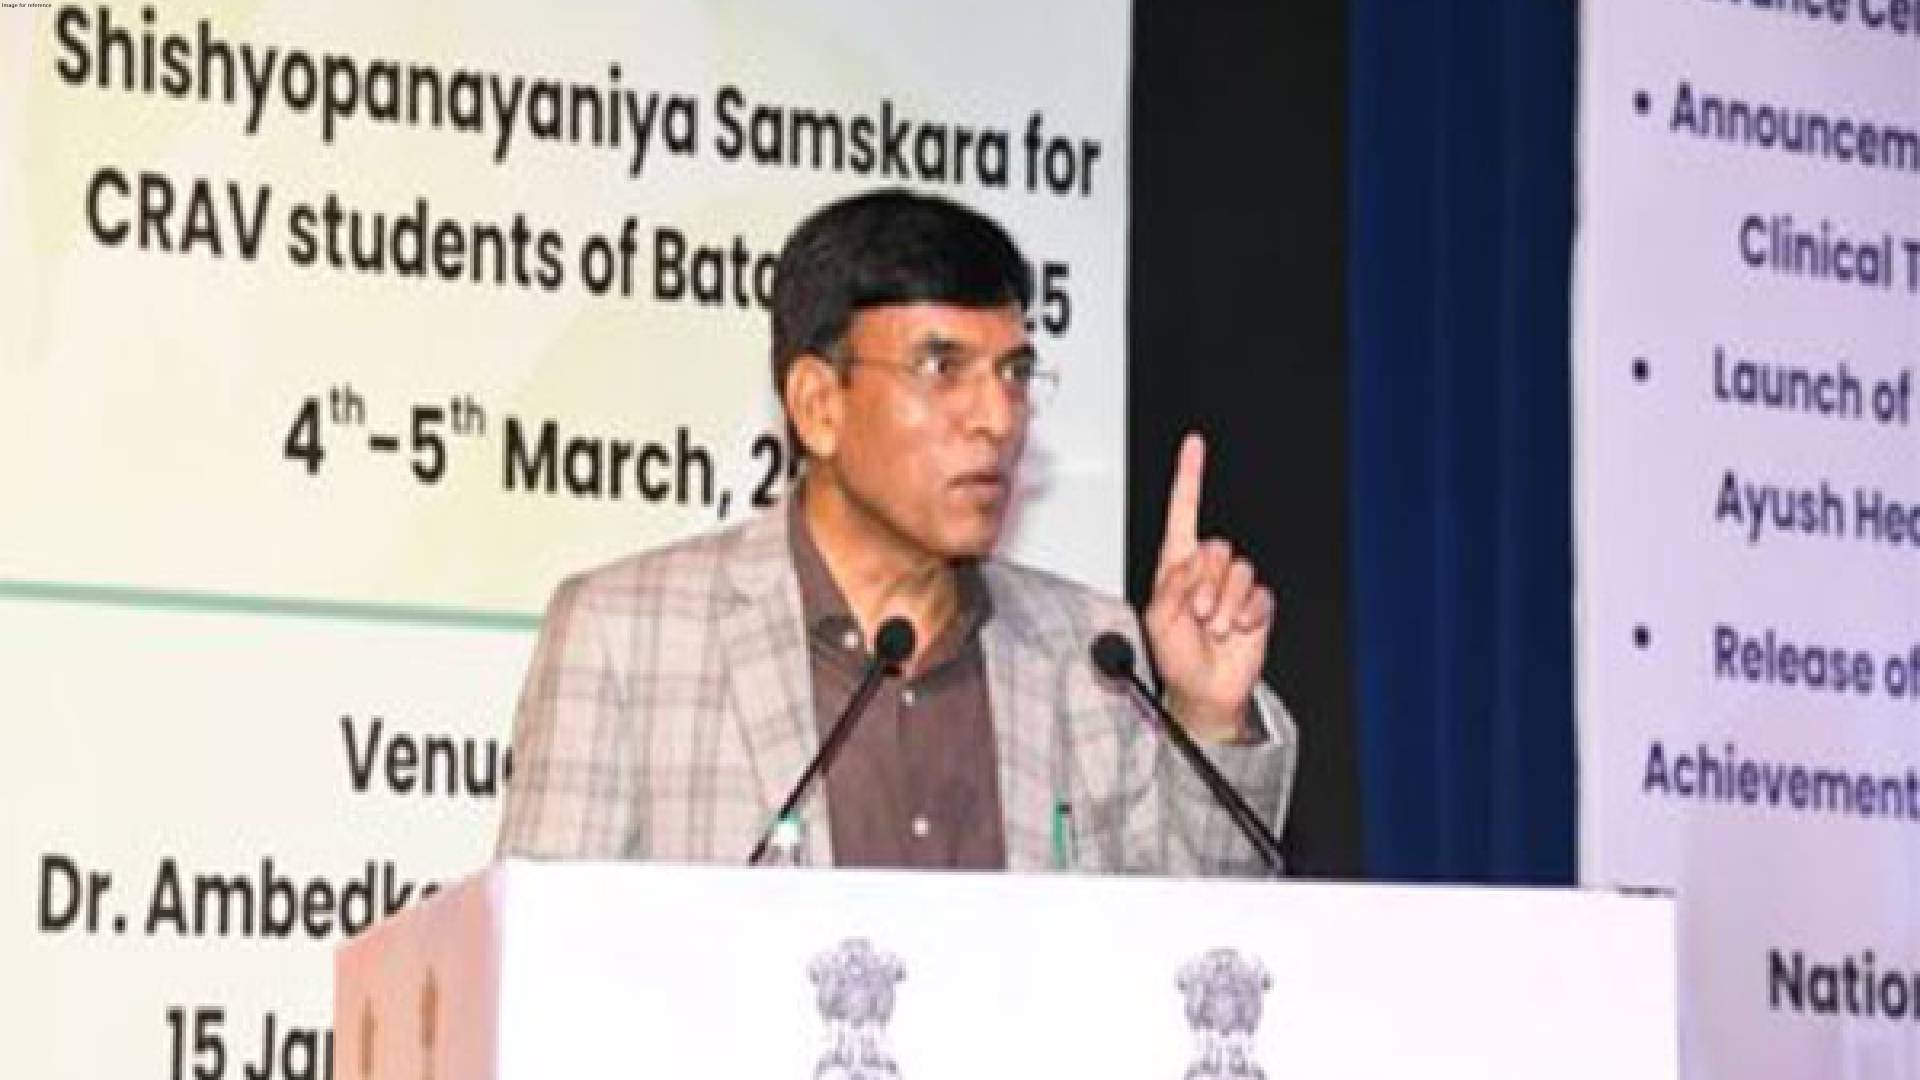 Mansukh Mandaviya launches AYUSH-ICMR Advanced Centre for Integrated Health Research in AIIMS